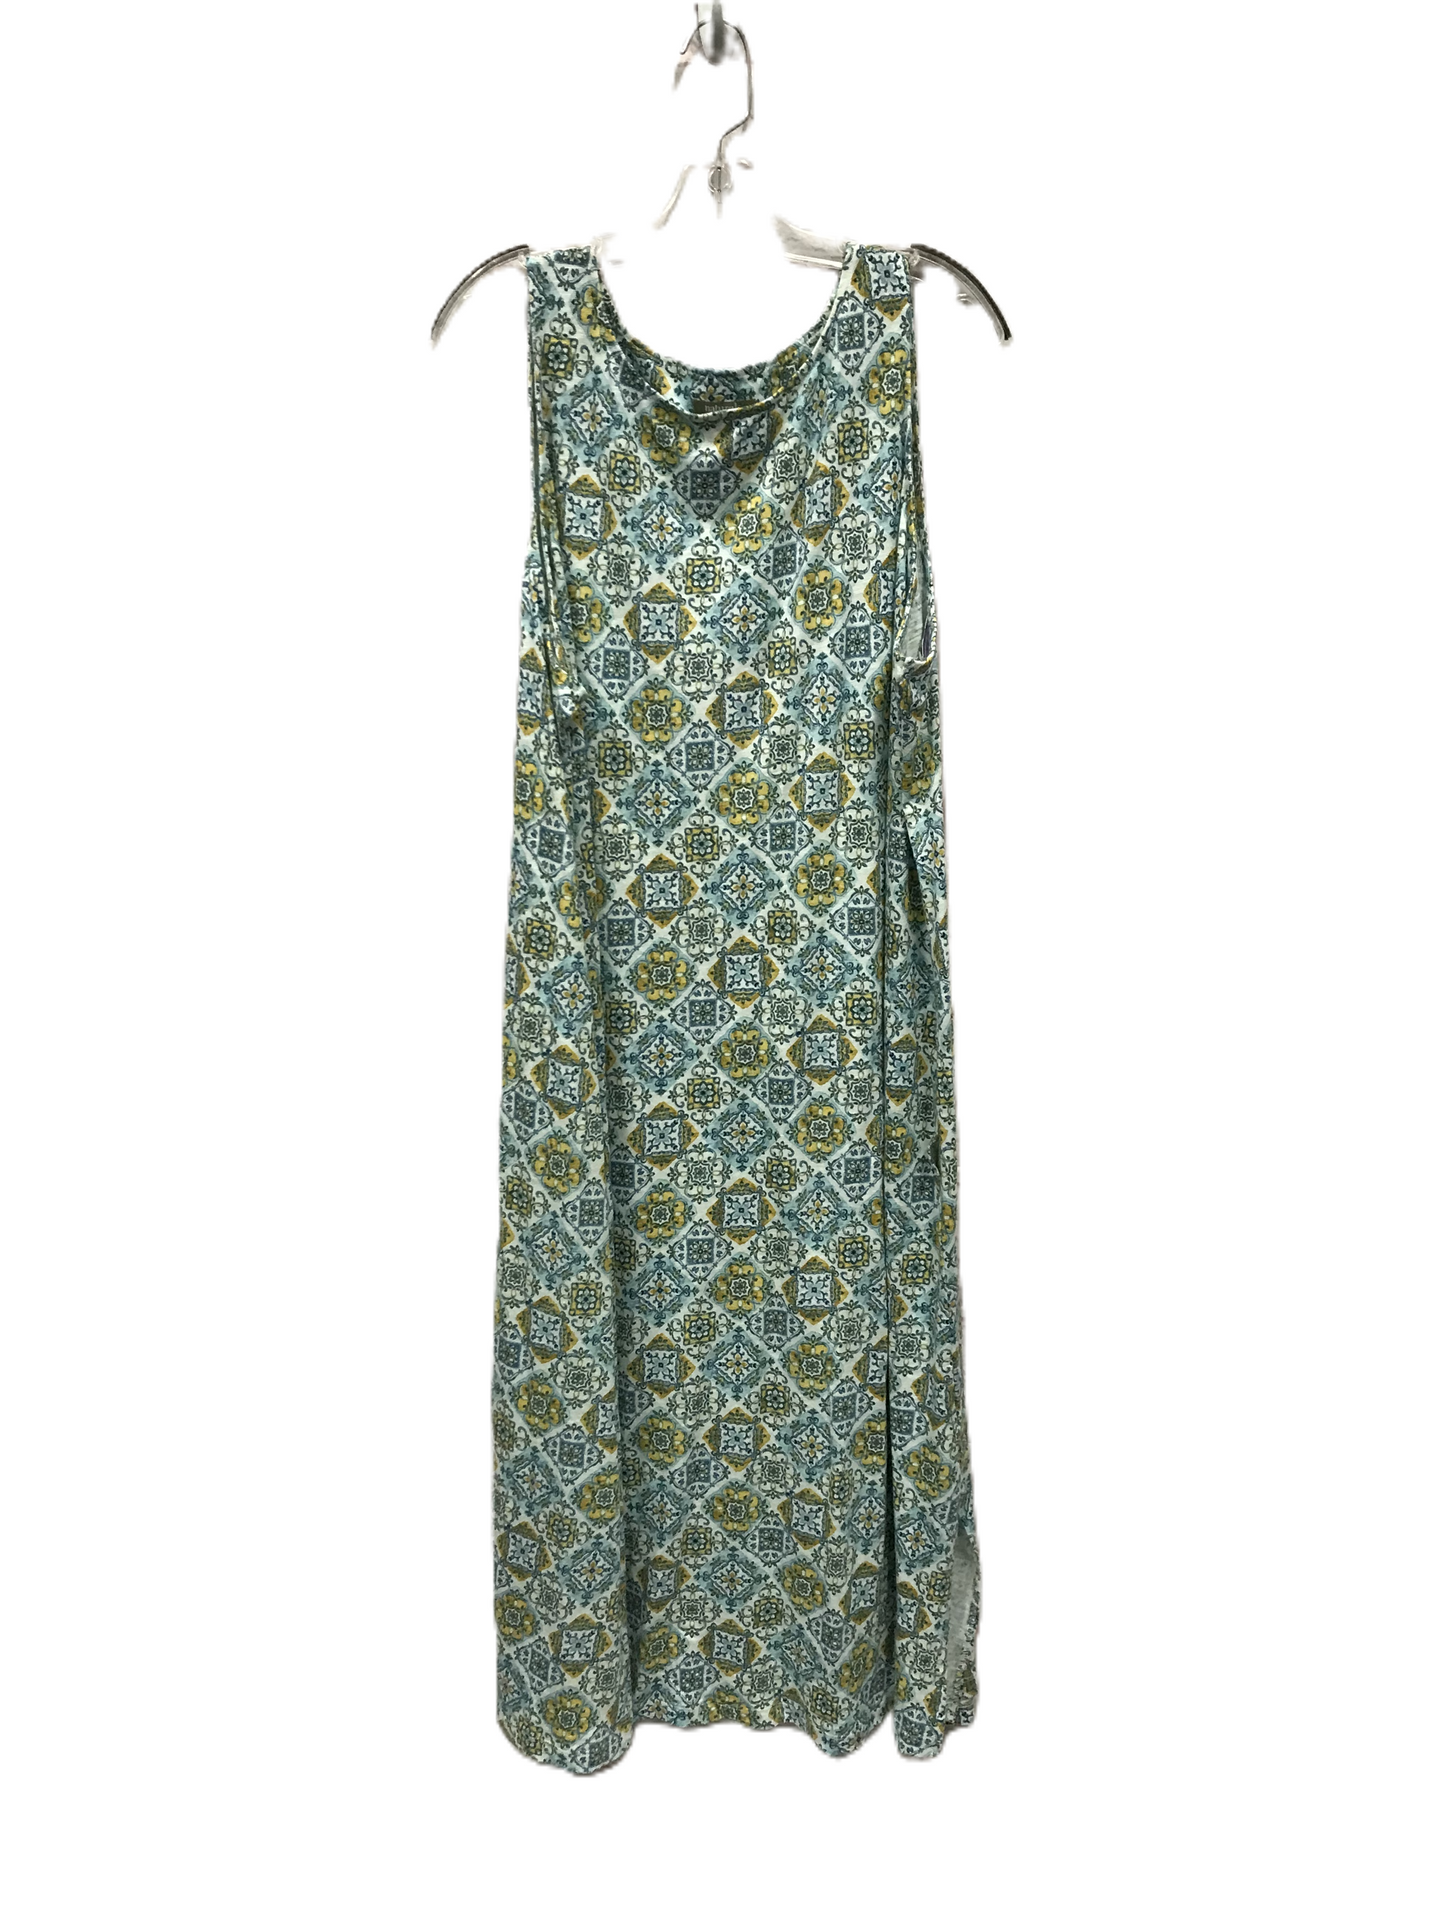 Green Dress Casual Maxi By Denim And Co Qvc, Size: 2x